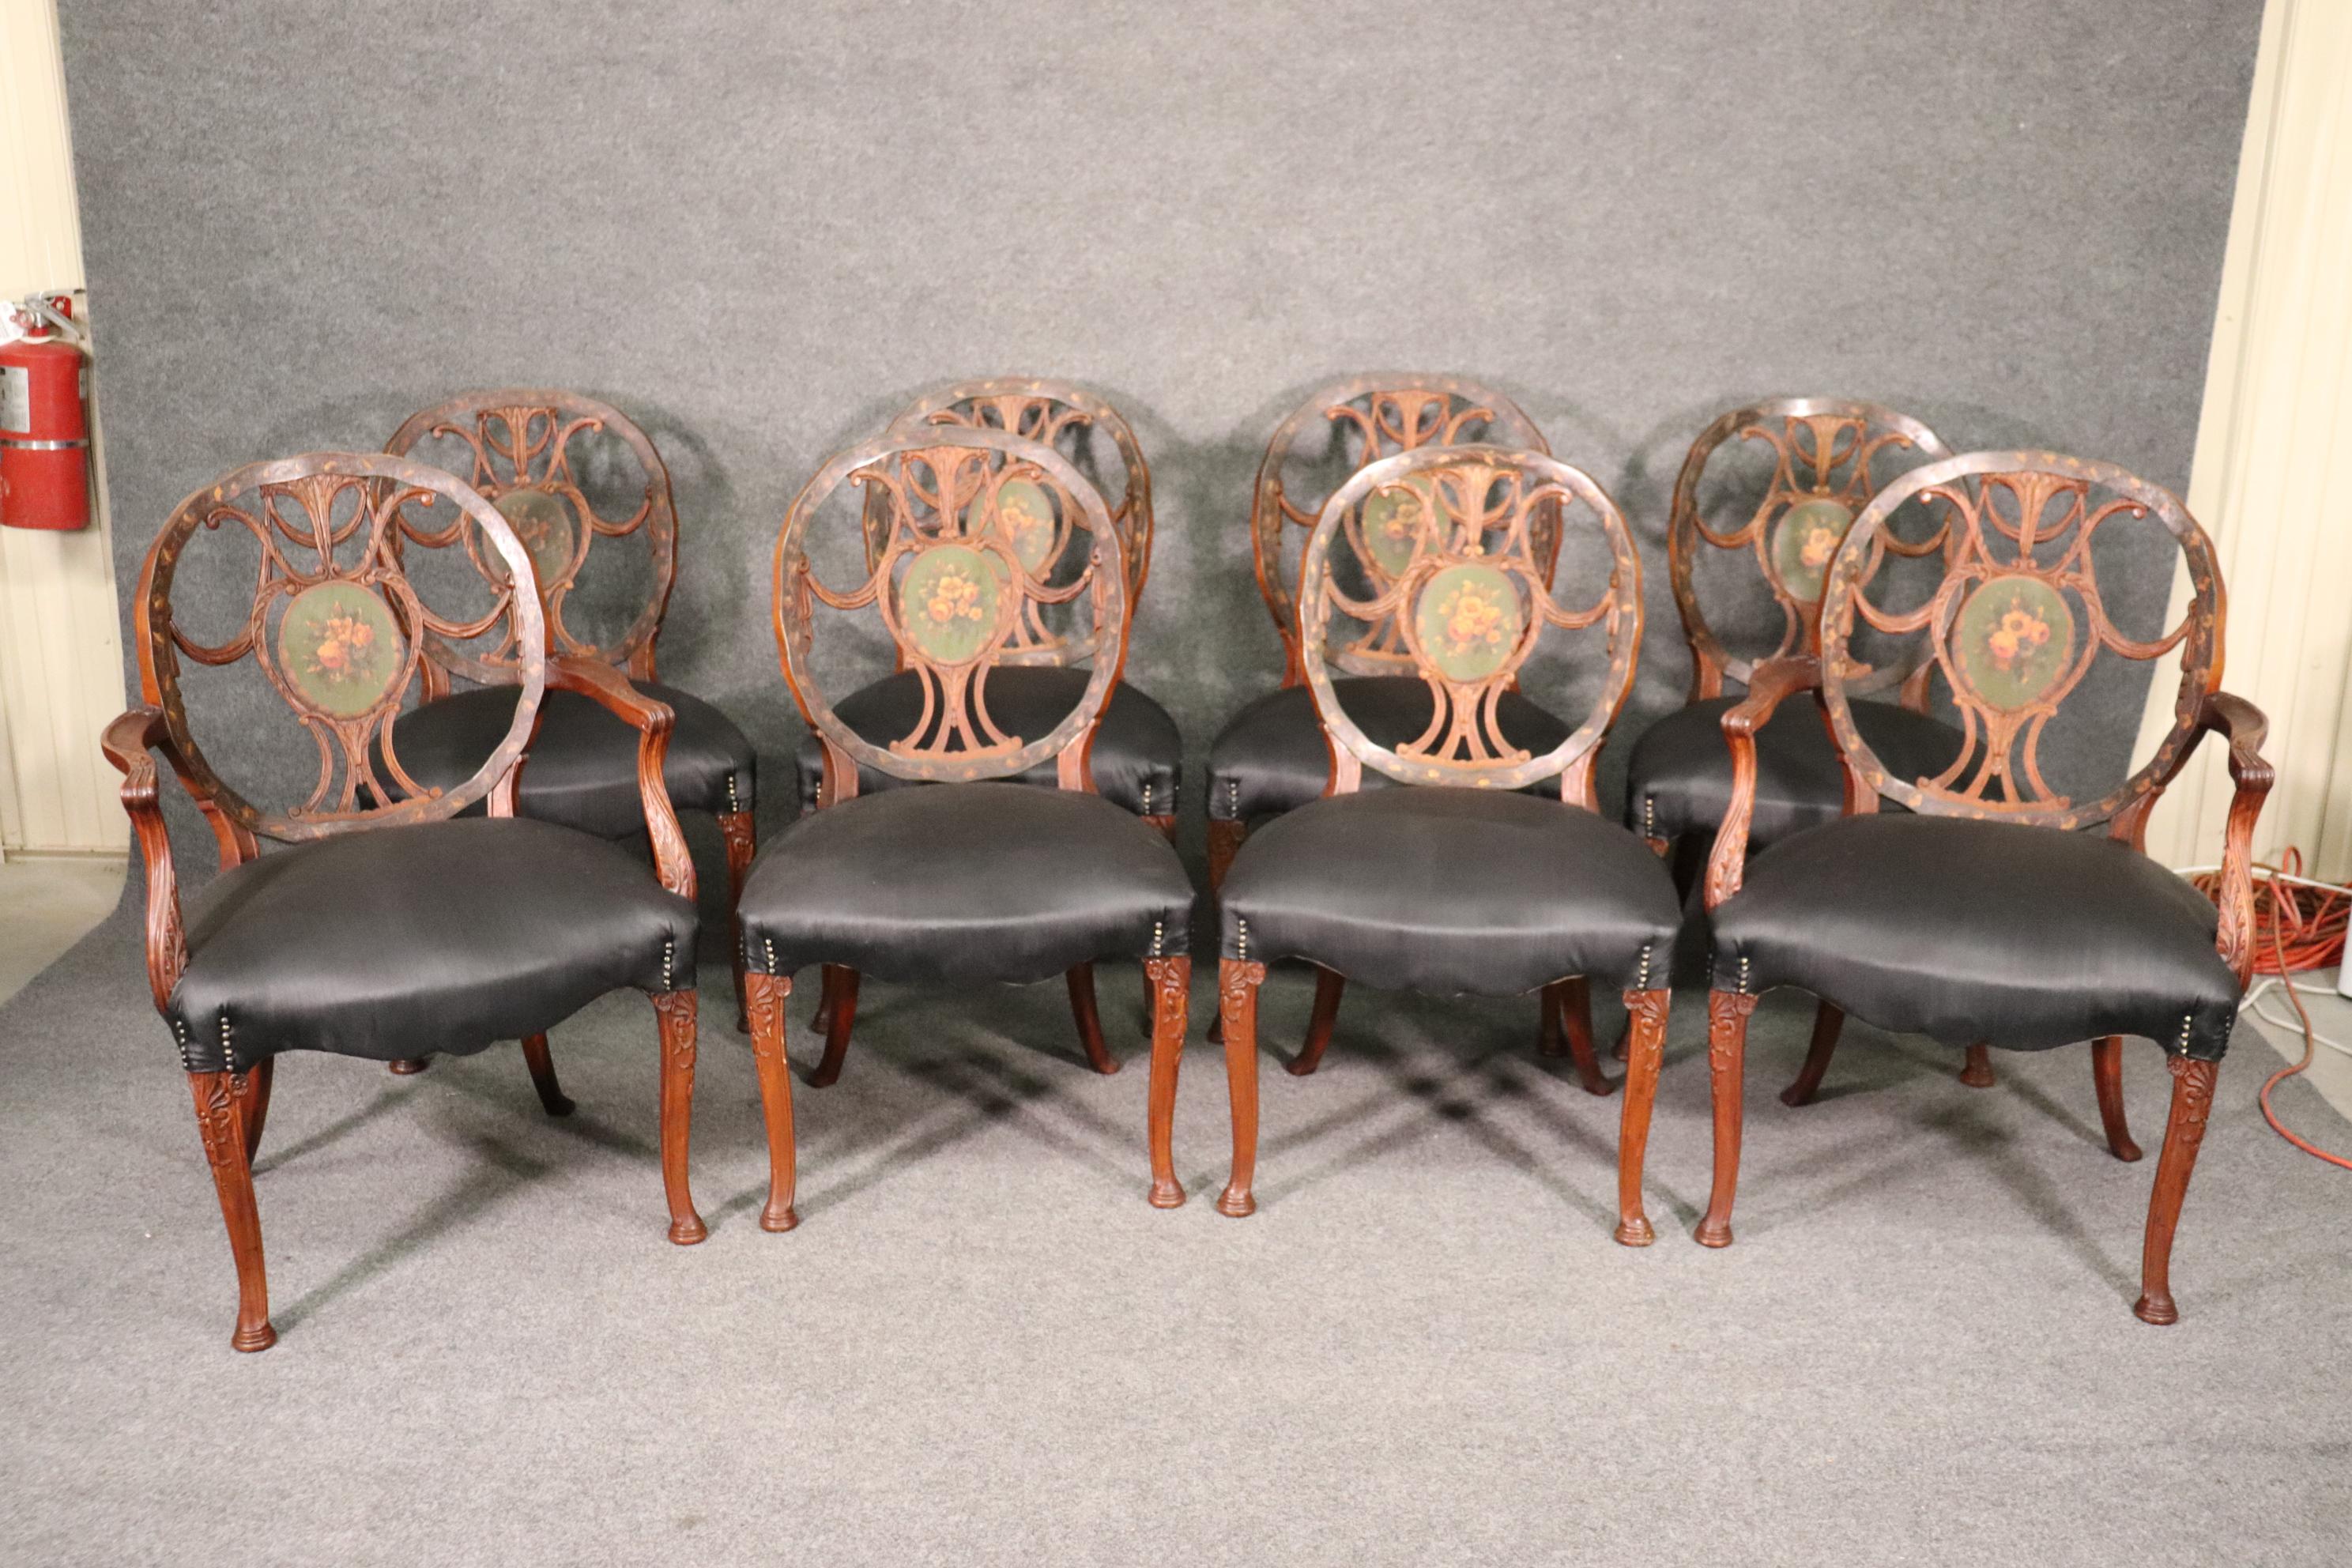 This is a very rare and desirable set of Adams dining chairs. The chairs feature their original finish and has that crazed crackled finish and their original waxed canvas upholstery. These chairs are in good antique condition and have no issues